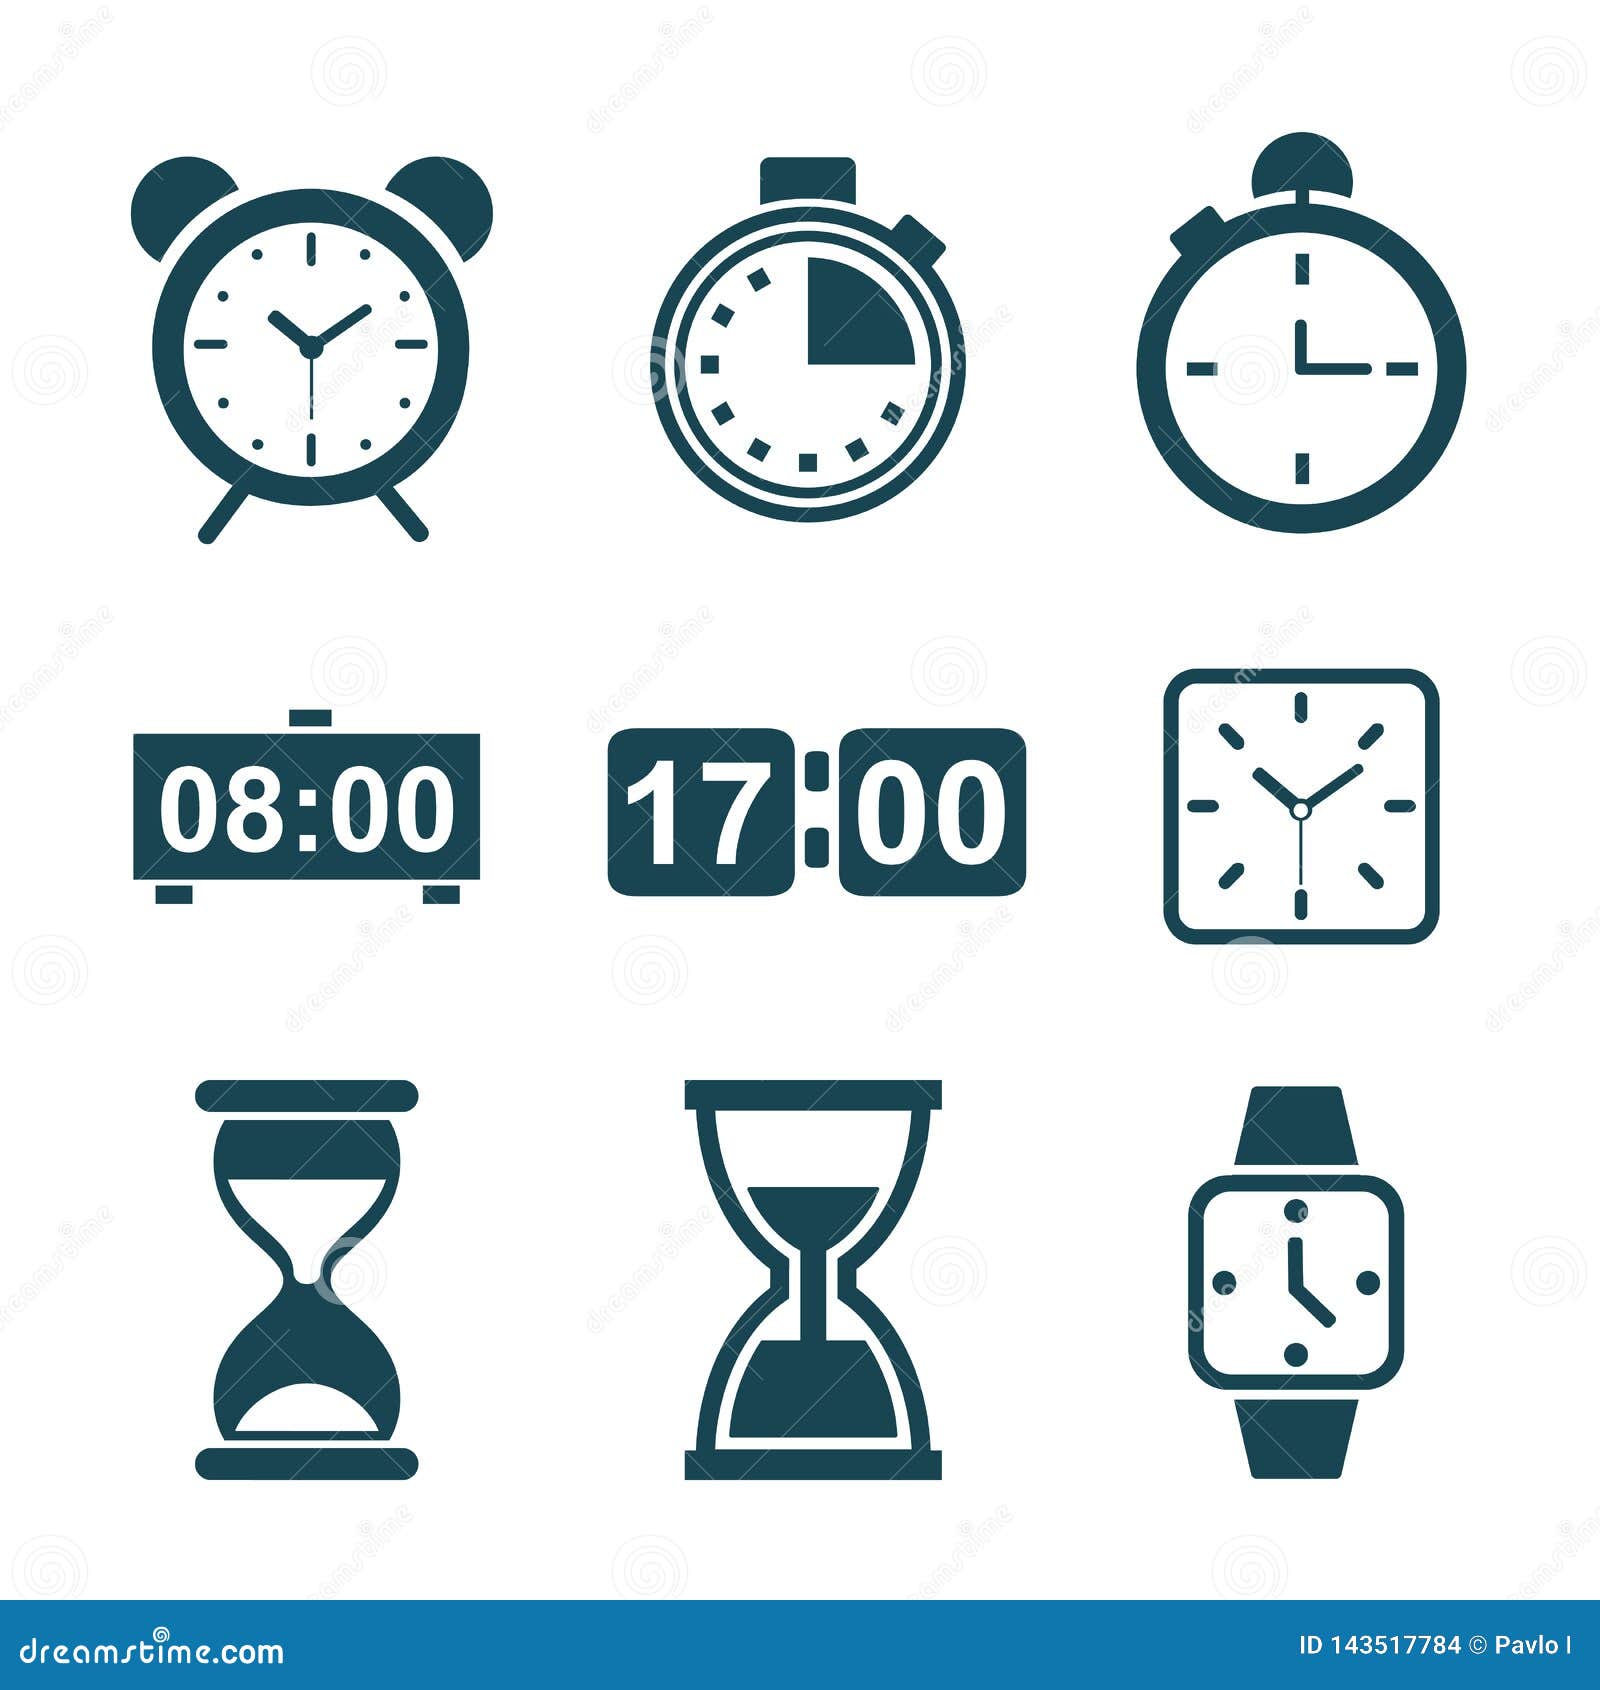 set hourglass icons, sandglass timer, clock flat icon for apps and websites Ã¢â¬â 